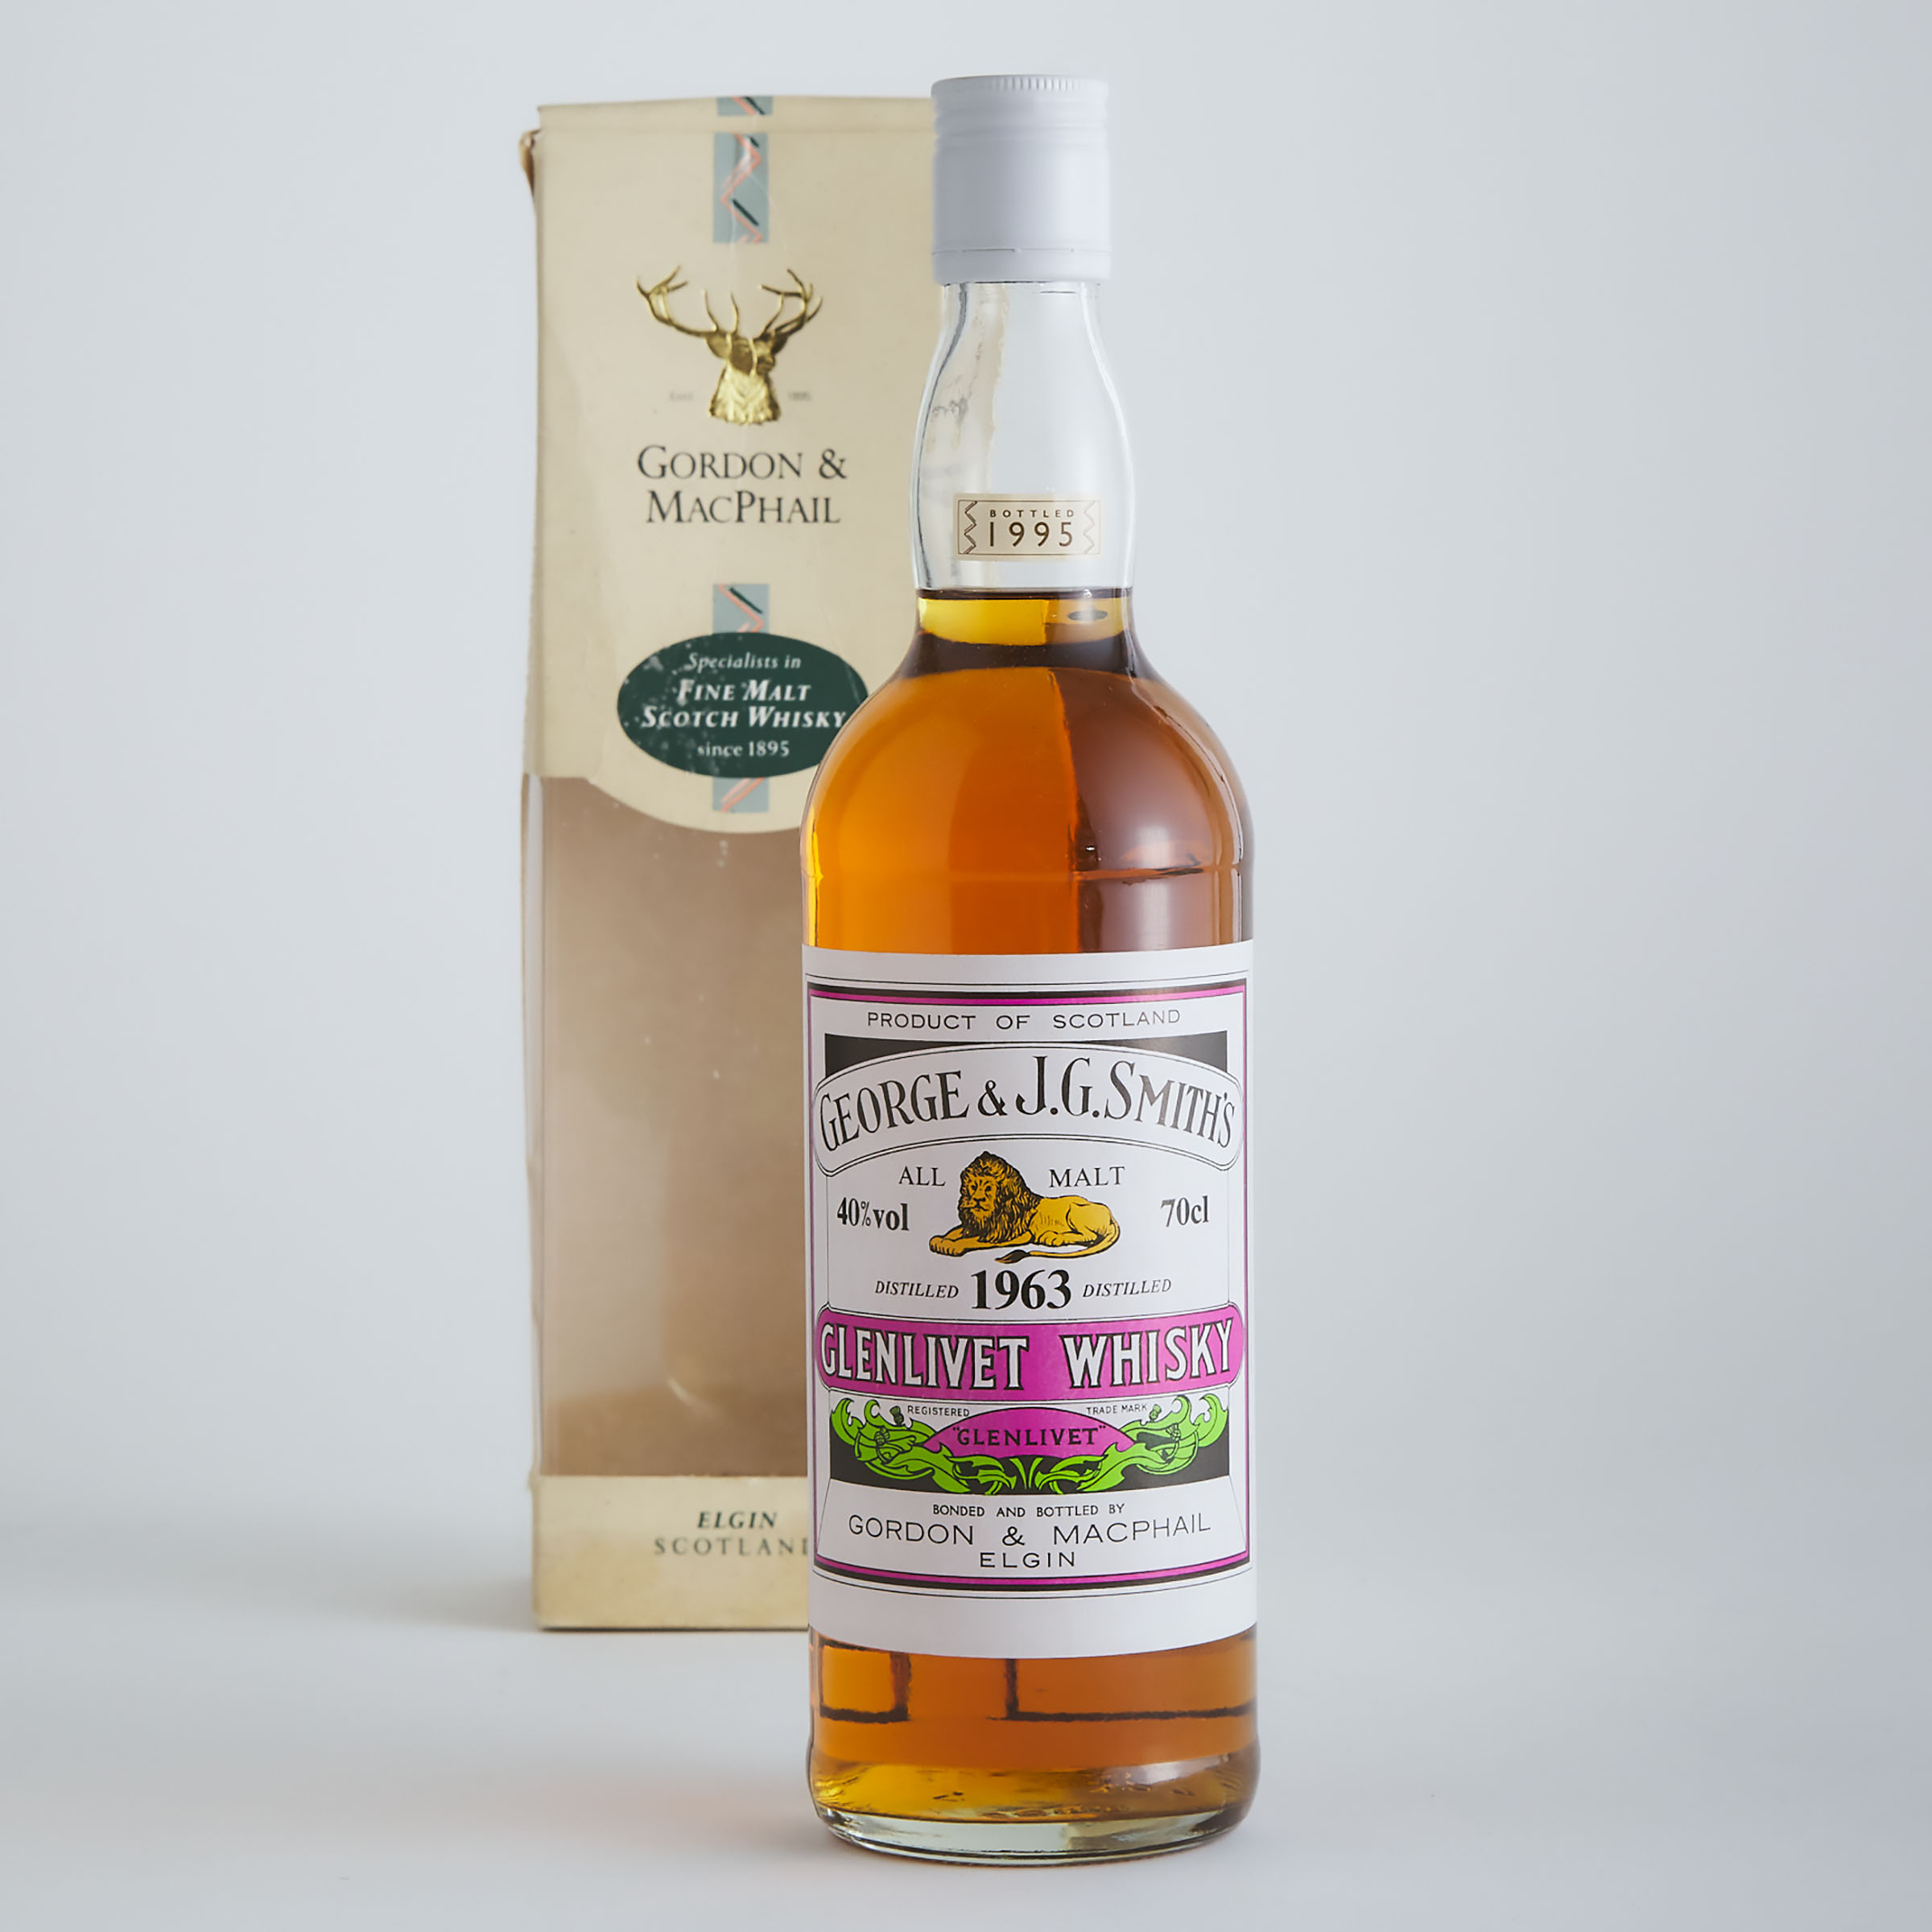 GEORGE AND J.G. SMITH'S GLENLIVET WHISKY NAS (ONE 70 CL)